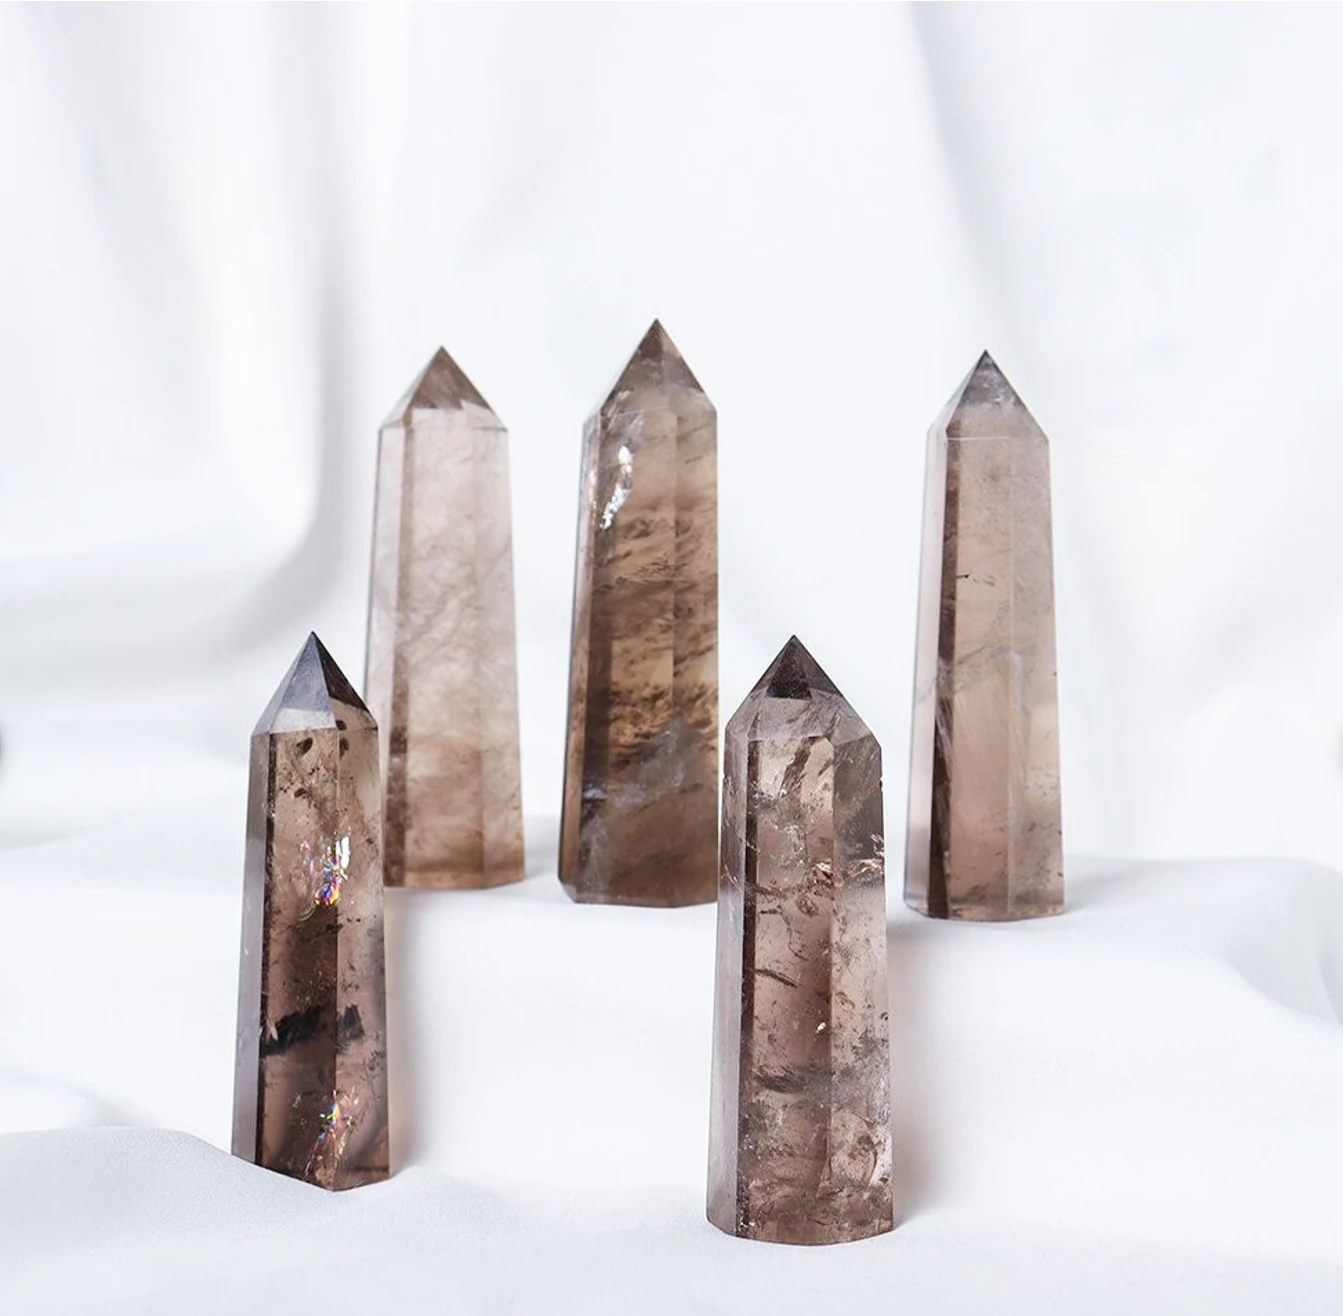 6208 - Smoky Quartz Tower - 7-8cm tall - 6 Fauceted Sides -  sold by piece-1